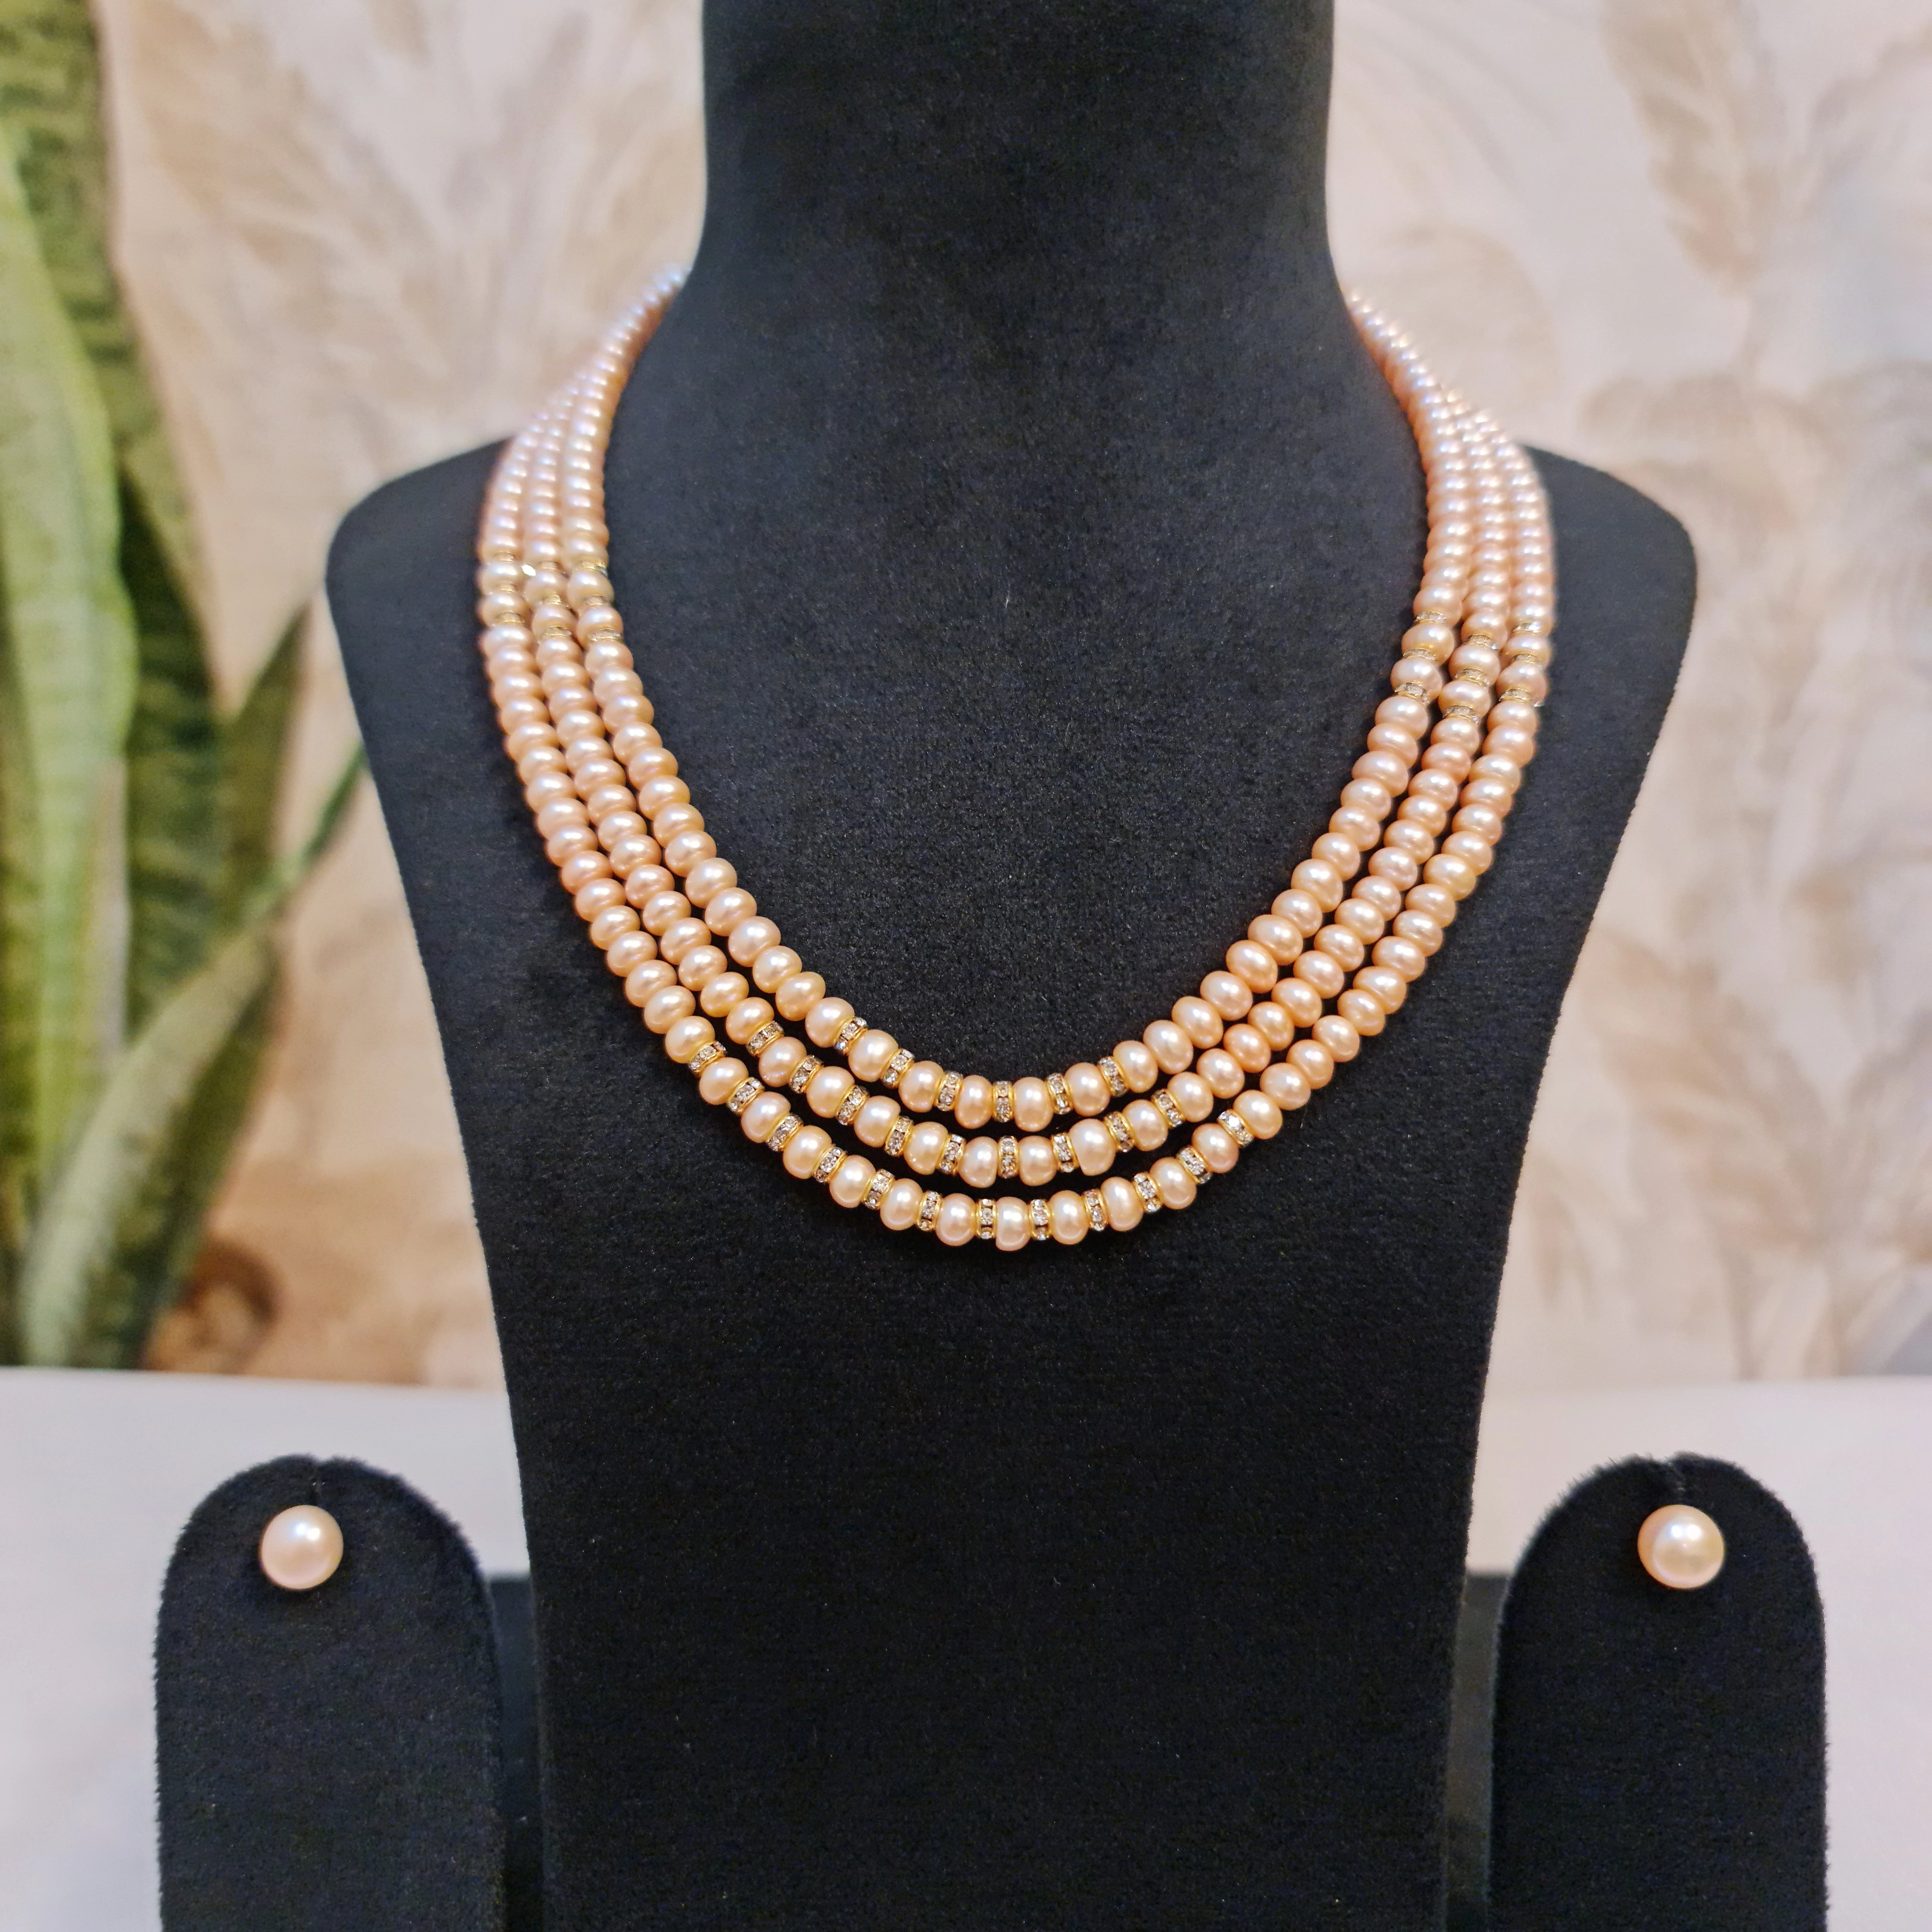 Radiant Triple-Layer Peach Pearls Necklace With Golden Zircon Spacers